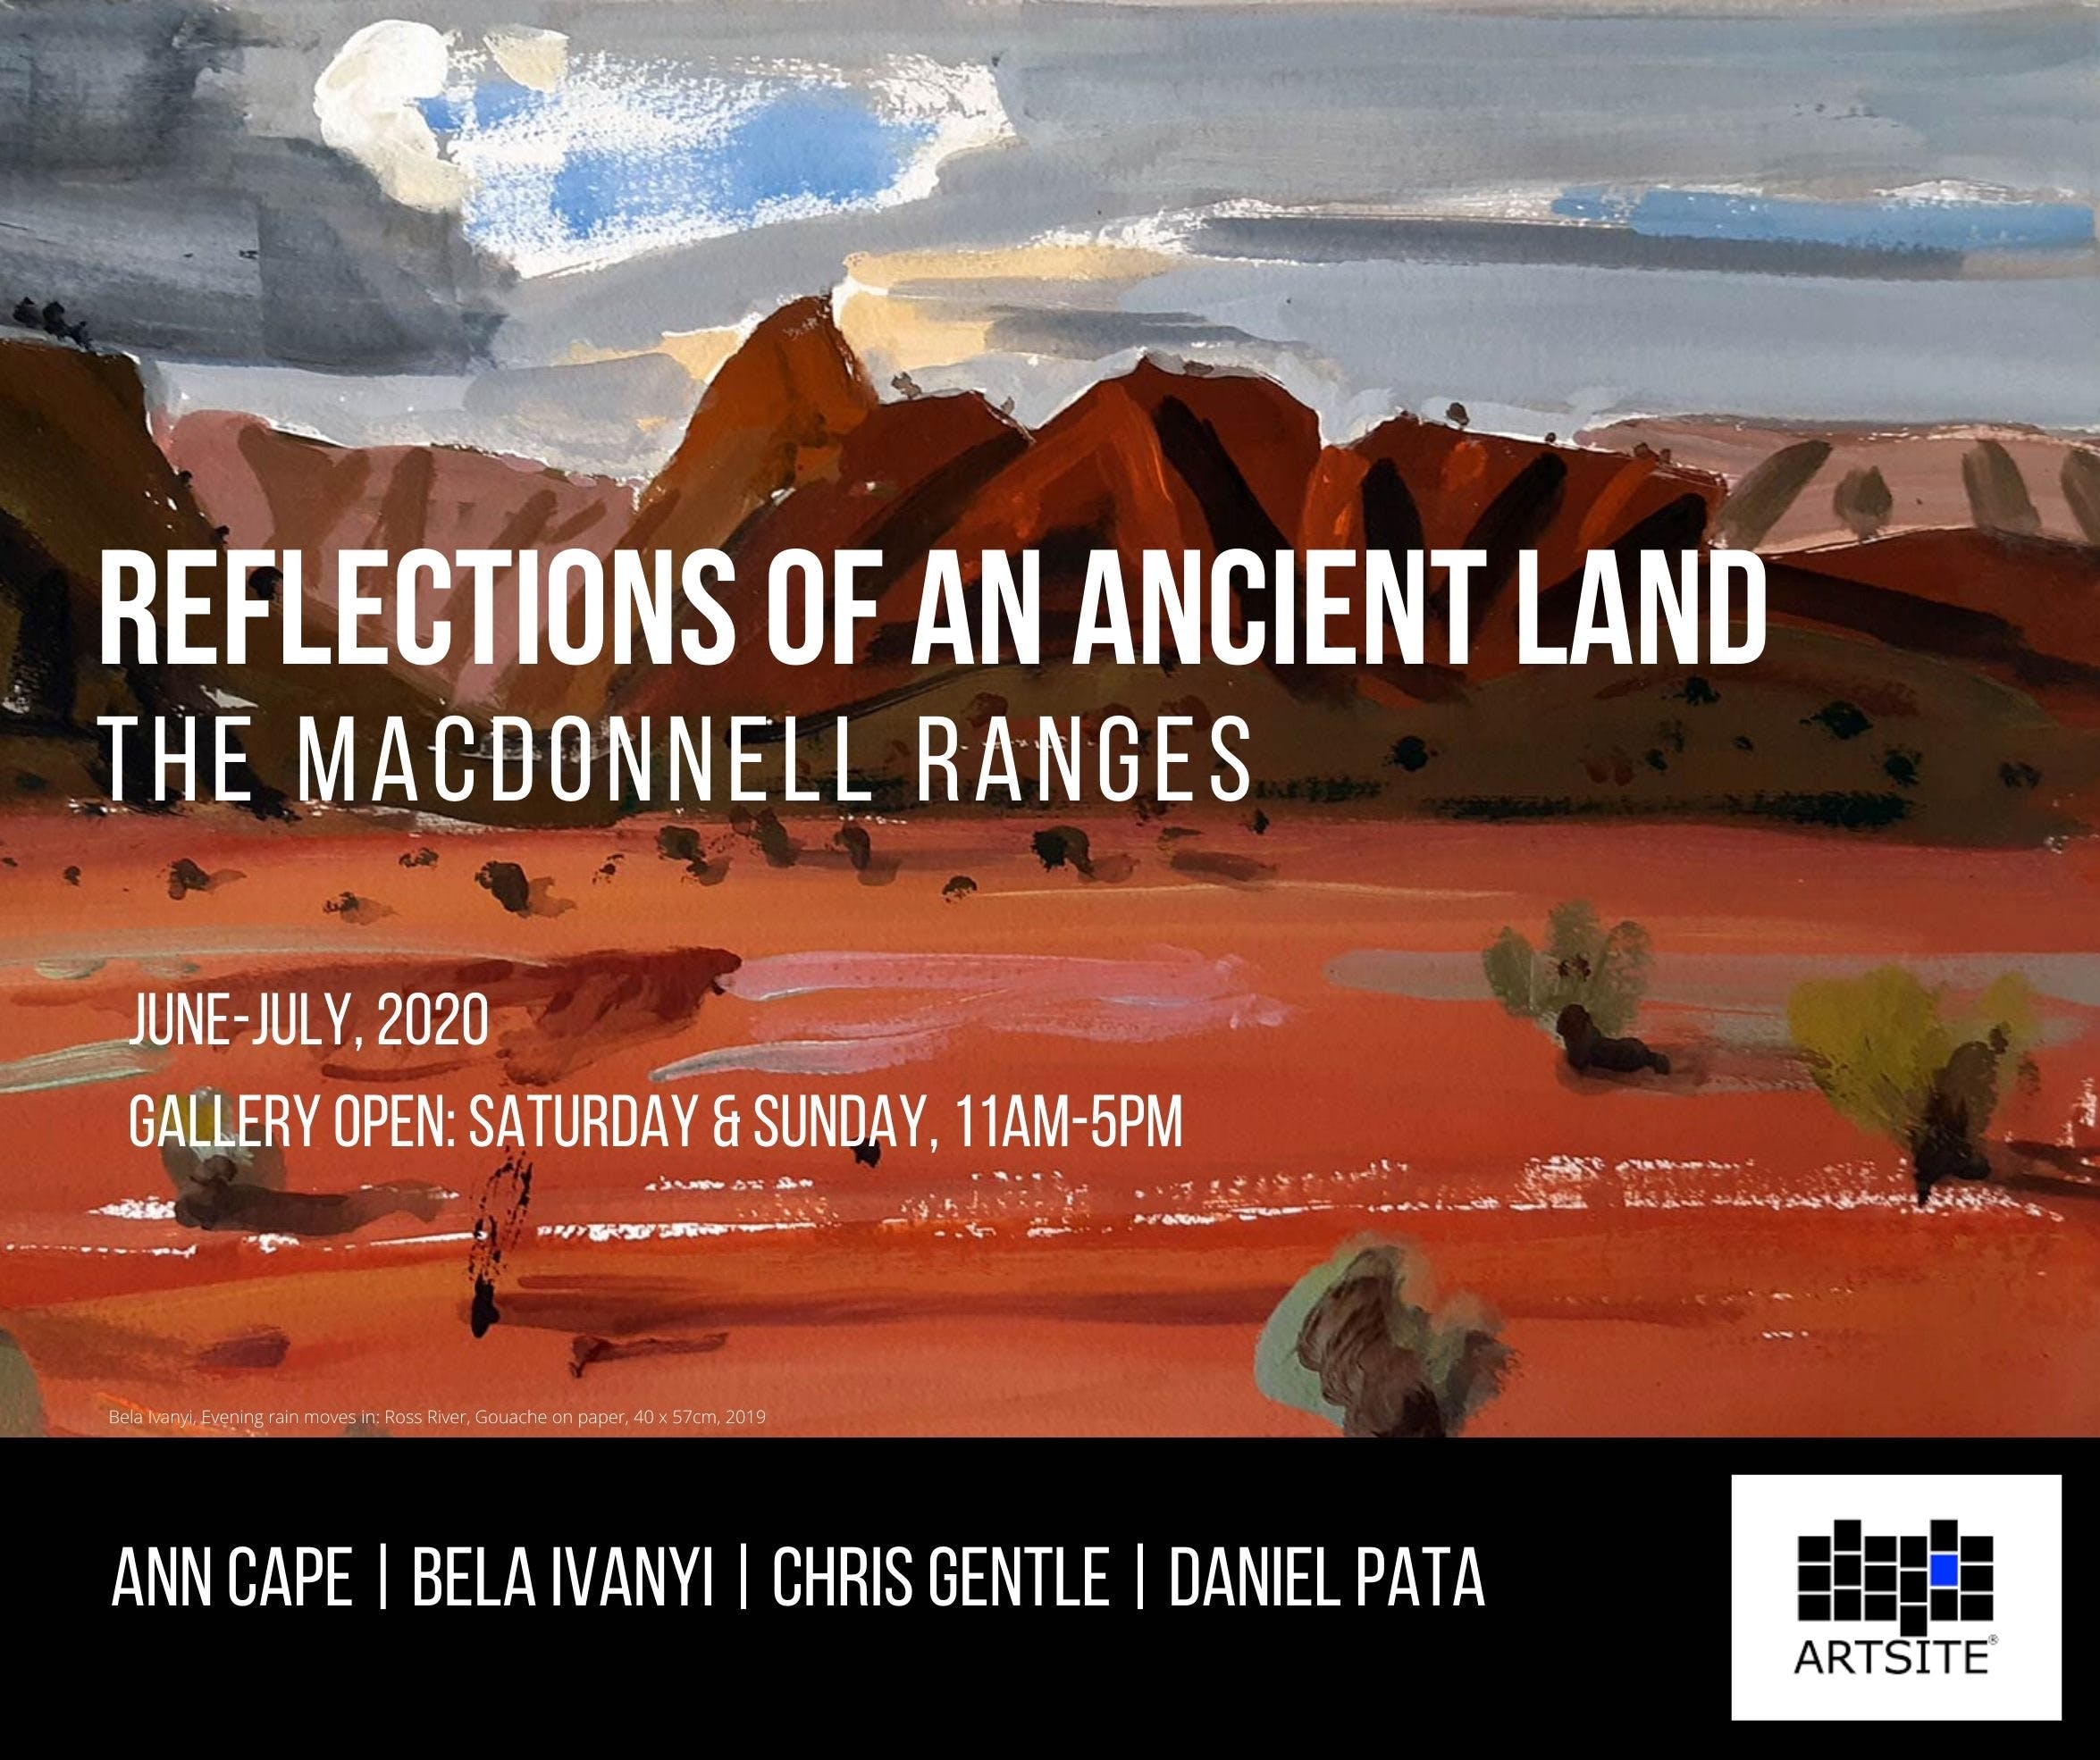 Reflections of An Ancient Land The MacDonnell Ranges - Accommodation Bookings